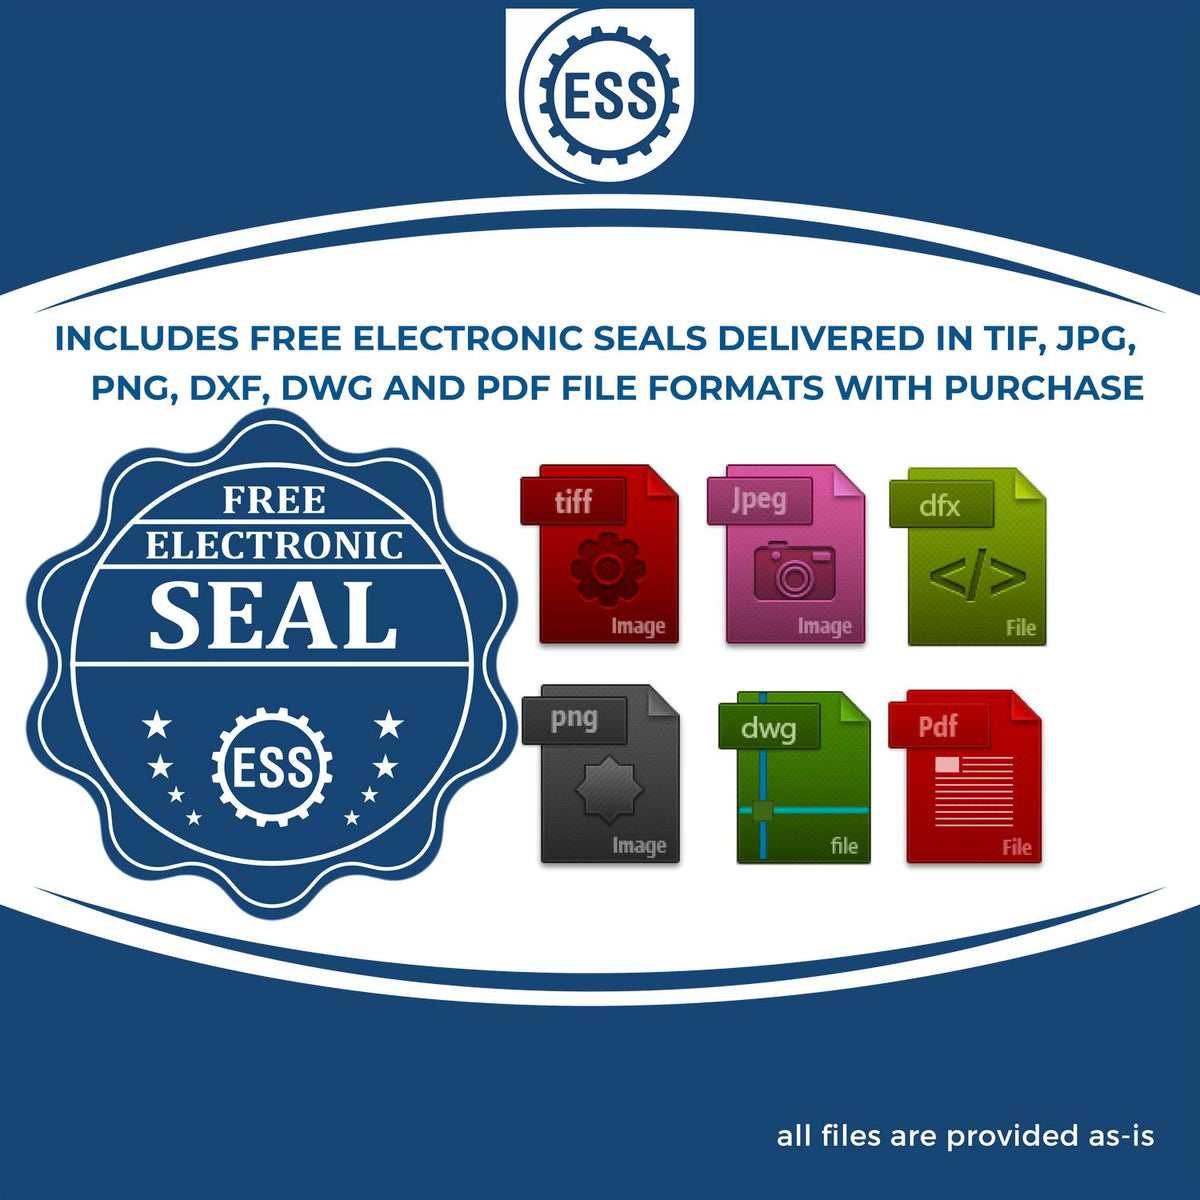 An infographic for the free electronic seal for the Hybrid Missouri Engineer Seal illustrating the different file type icons such as DXF, DWG, TIF, JPG and PNG.